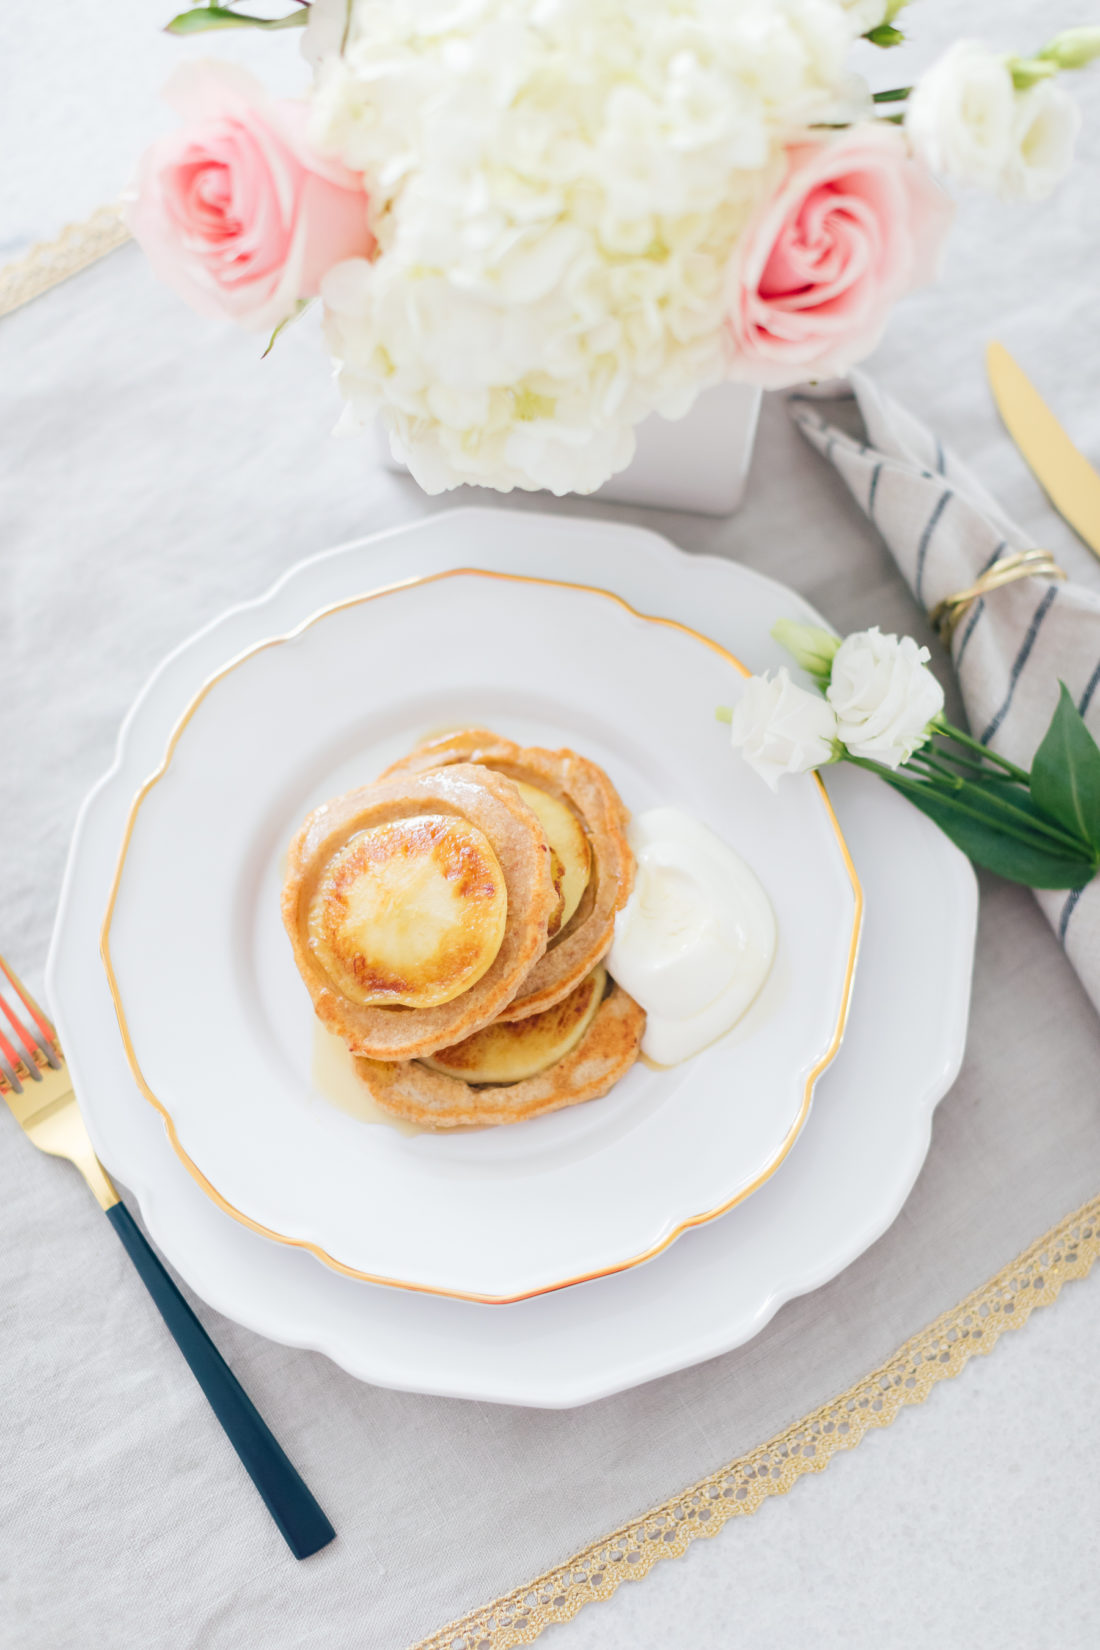 Eva Amurri Martino of Happily Eva After shares her recipe for Glow Pancakes for Mother's Day Brunch